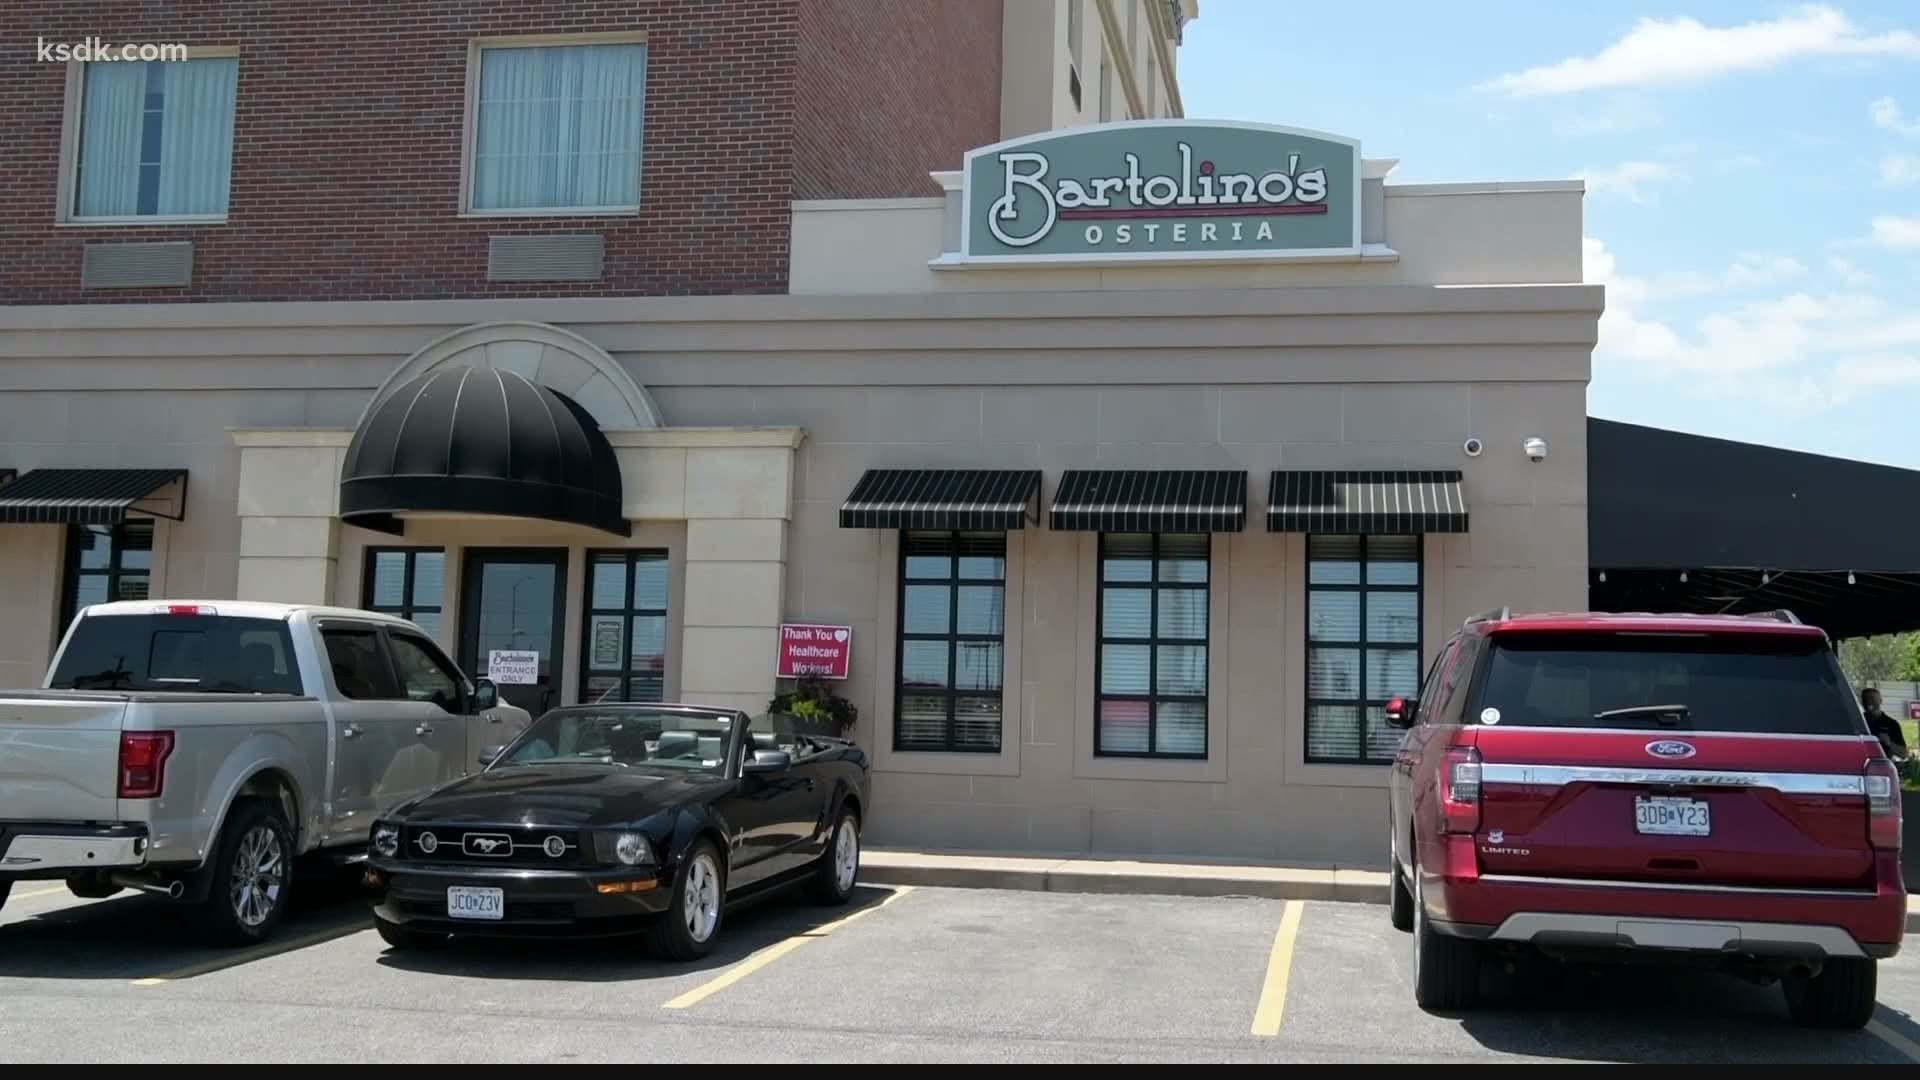 Find out why the Bartolino’s restaurants have been successful for so many years!